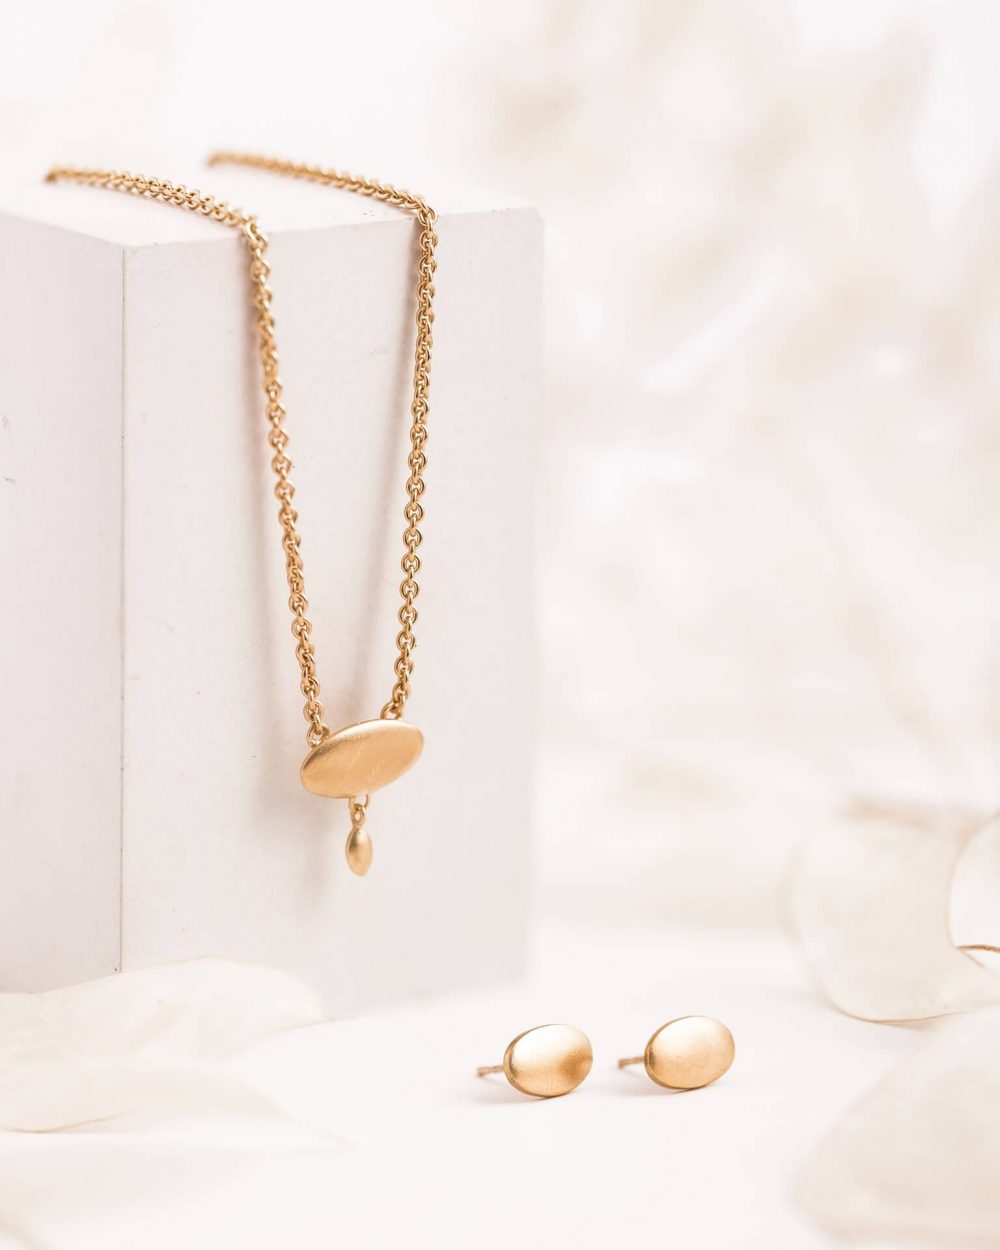 Gold Oval Necklace And Earring Jewellery Gift Set By Jacks Turner.